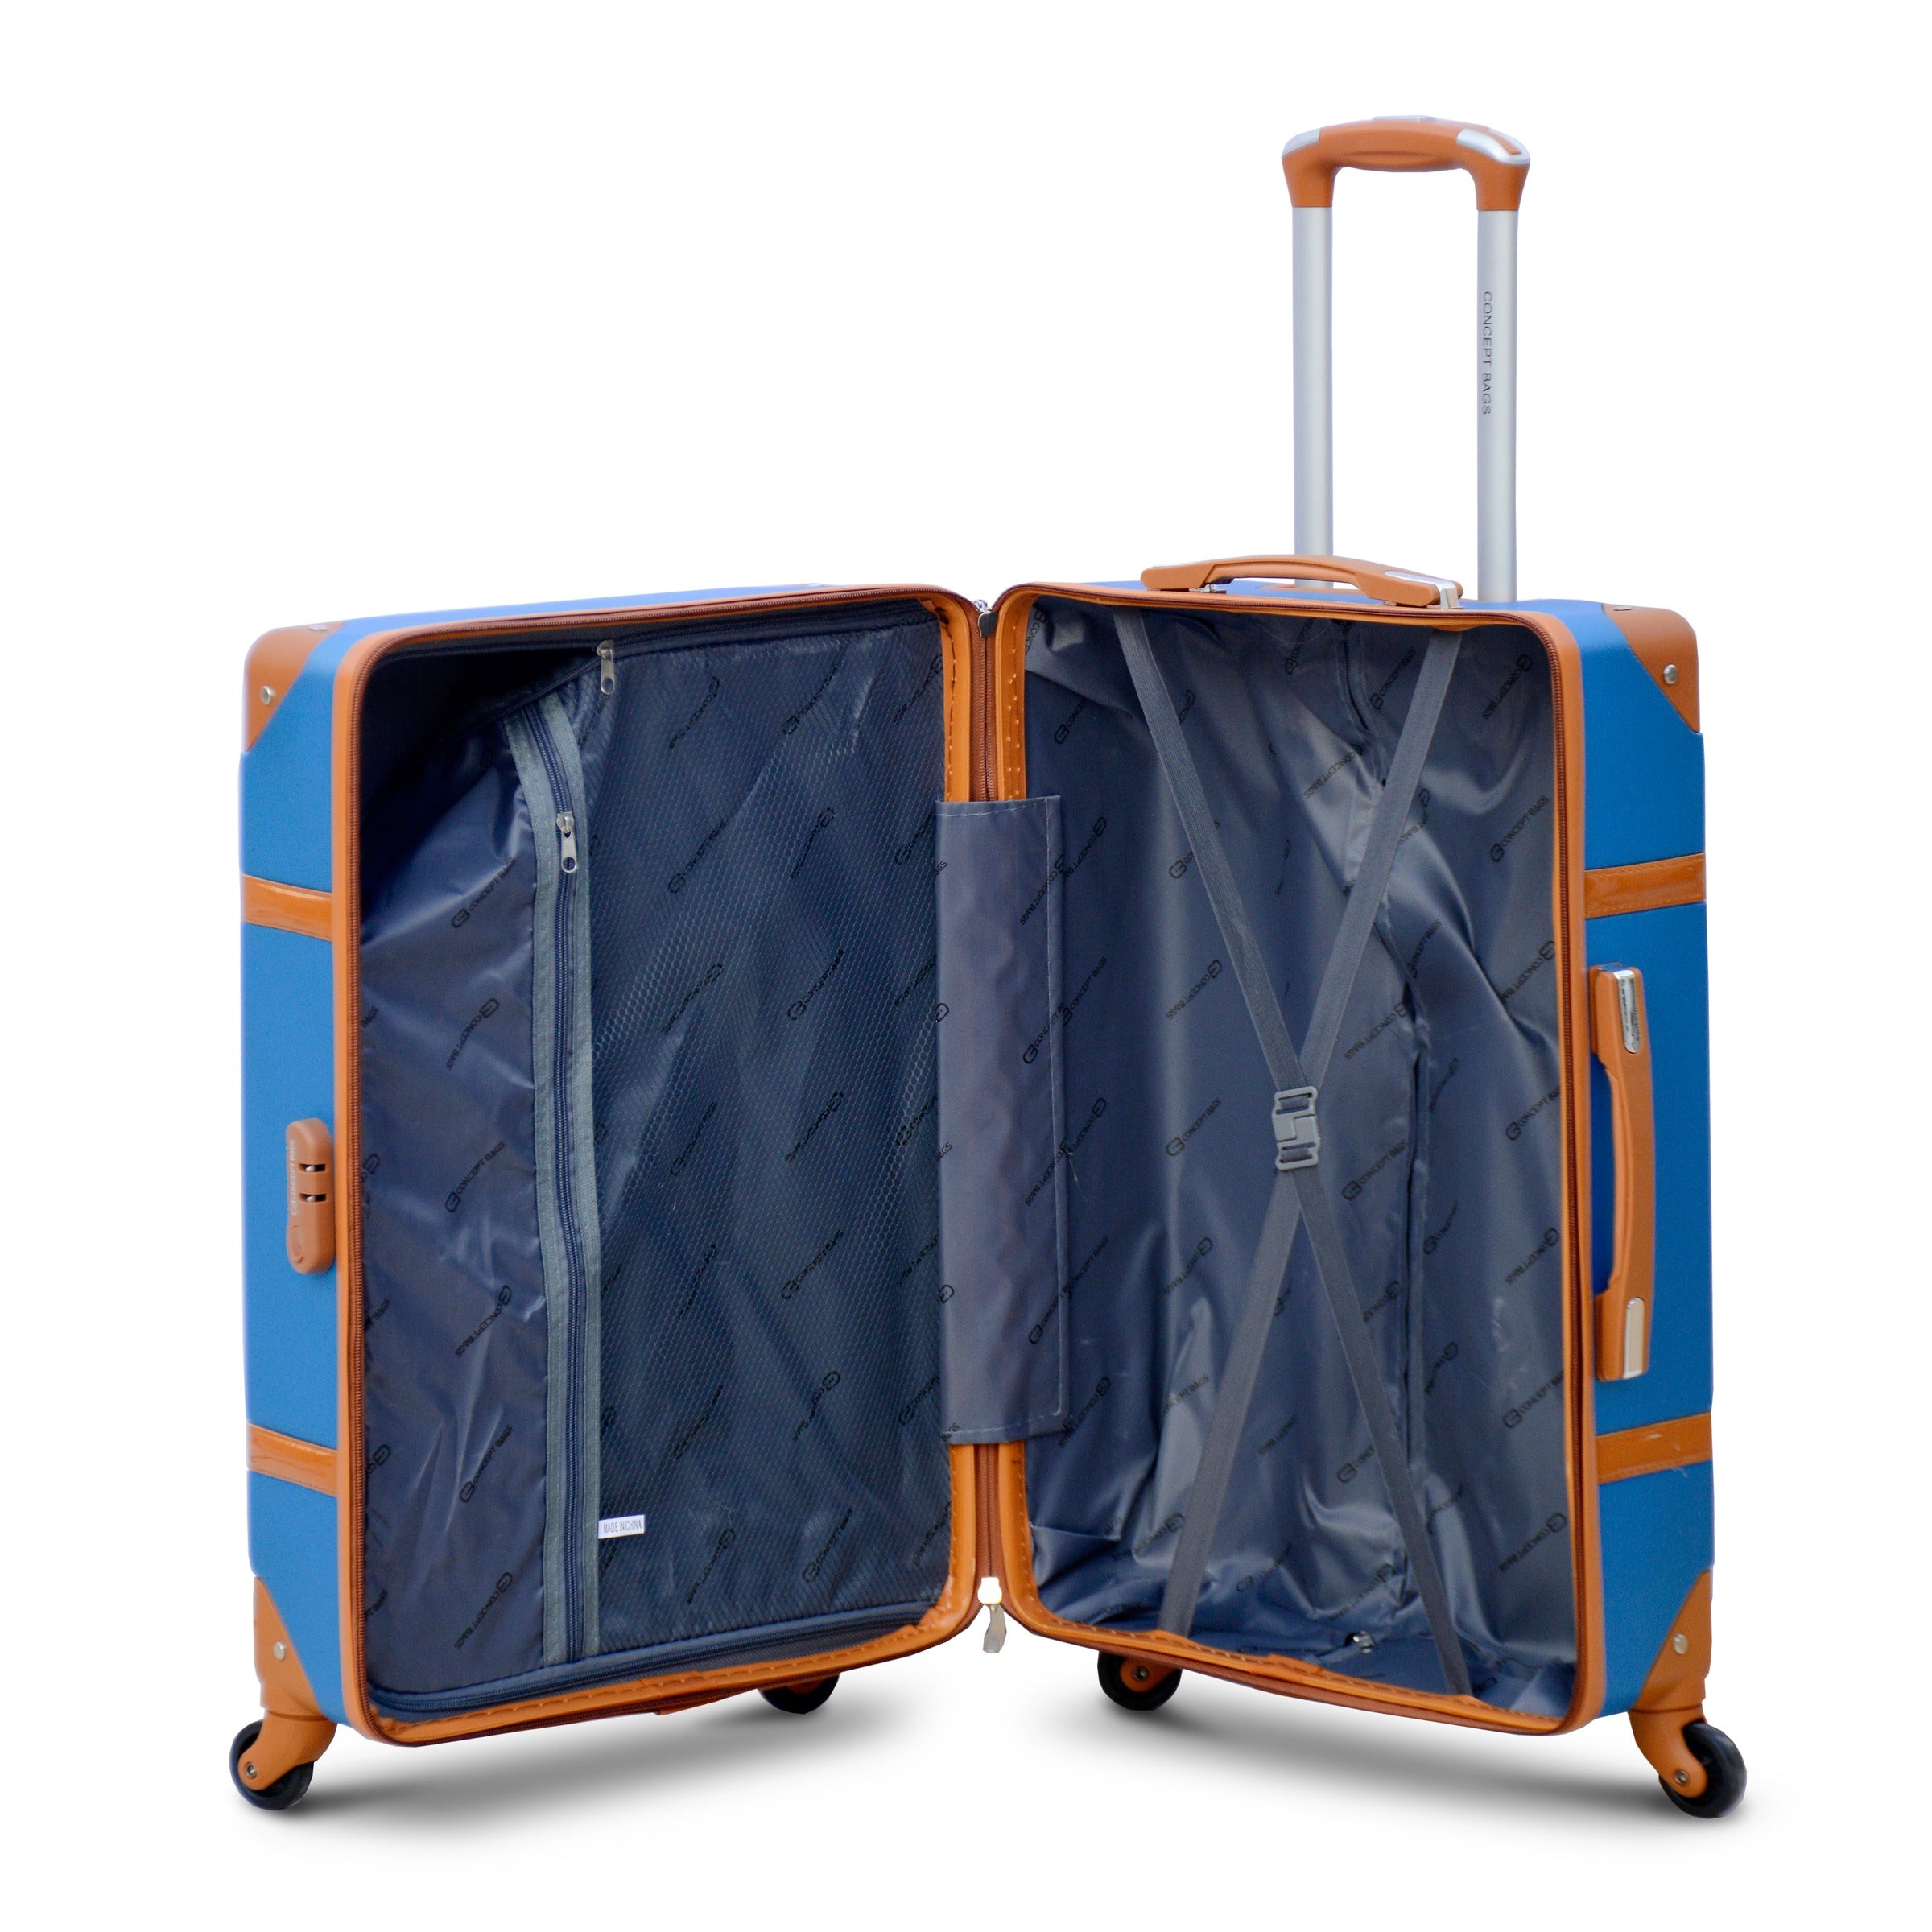 Corner Guard Lightweight ABS Luggage | Hard Case Trolley Bag | 4 Pcs Full Set 7” 20” 24” 28 inches | 2 Years Warranty | Blue